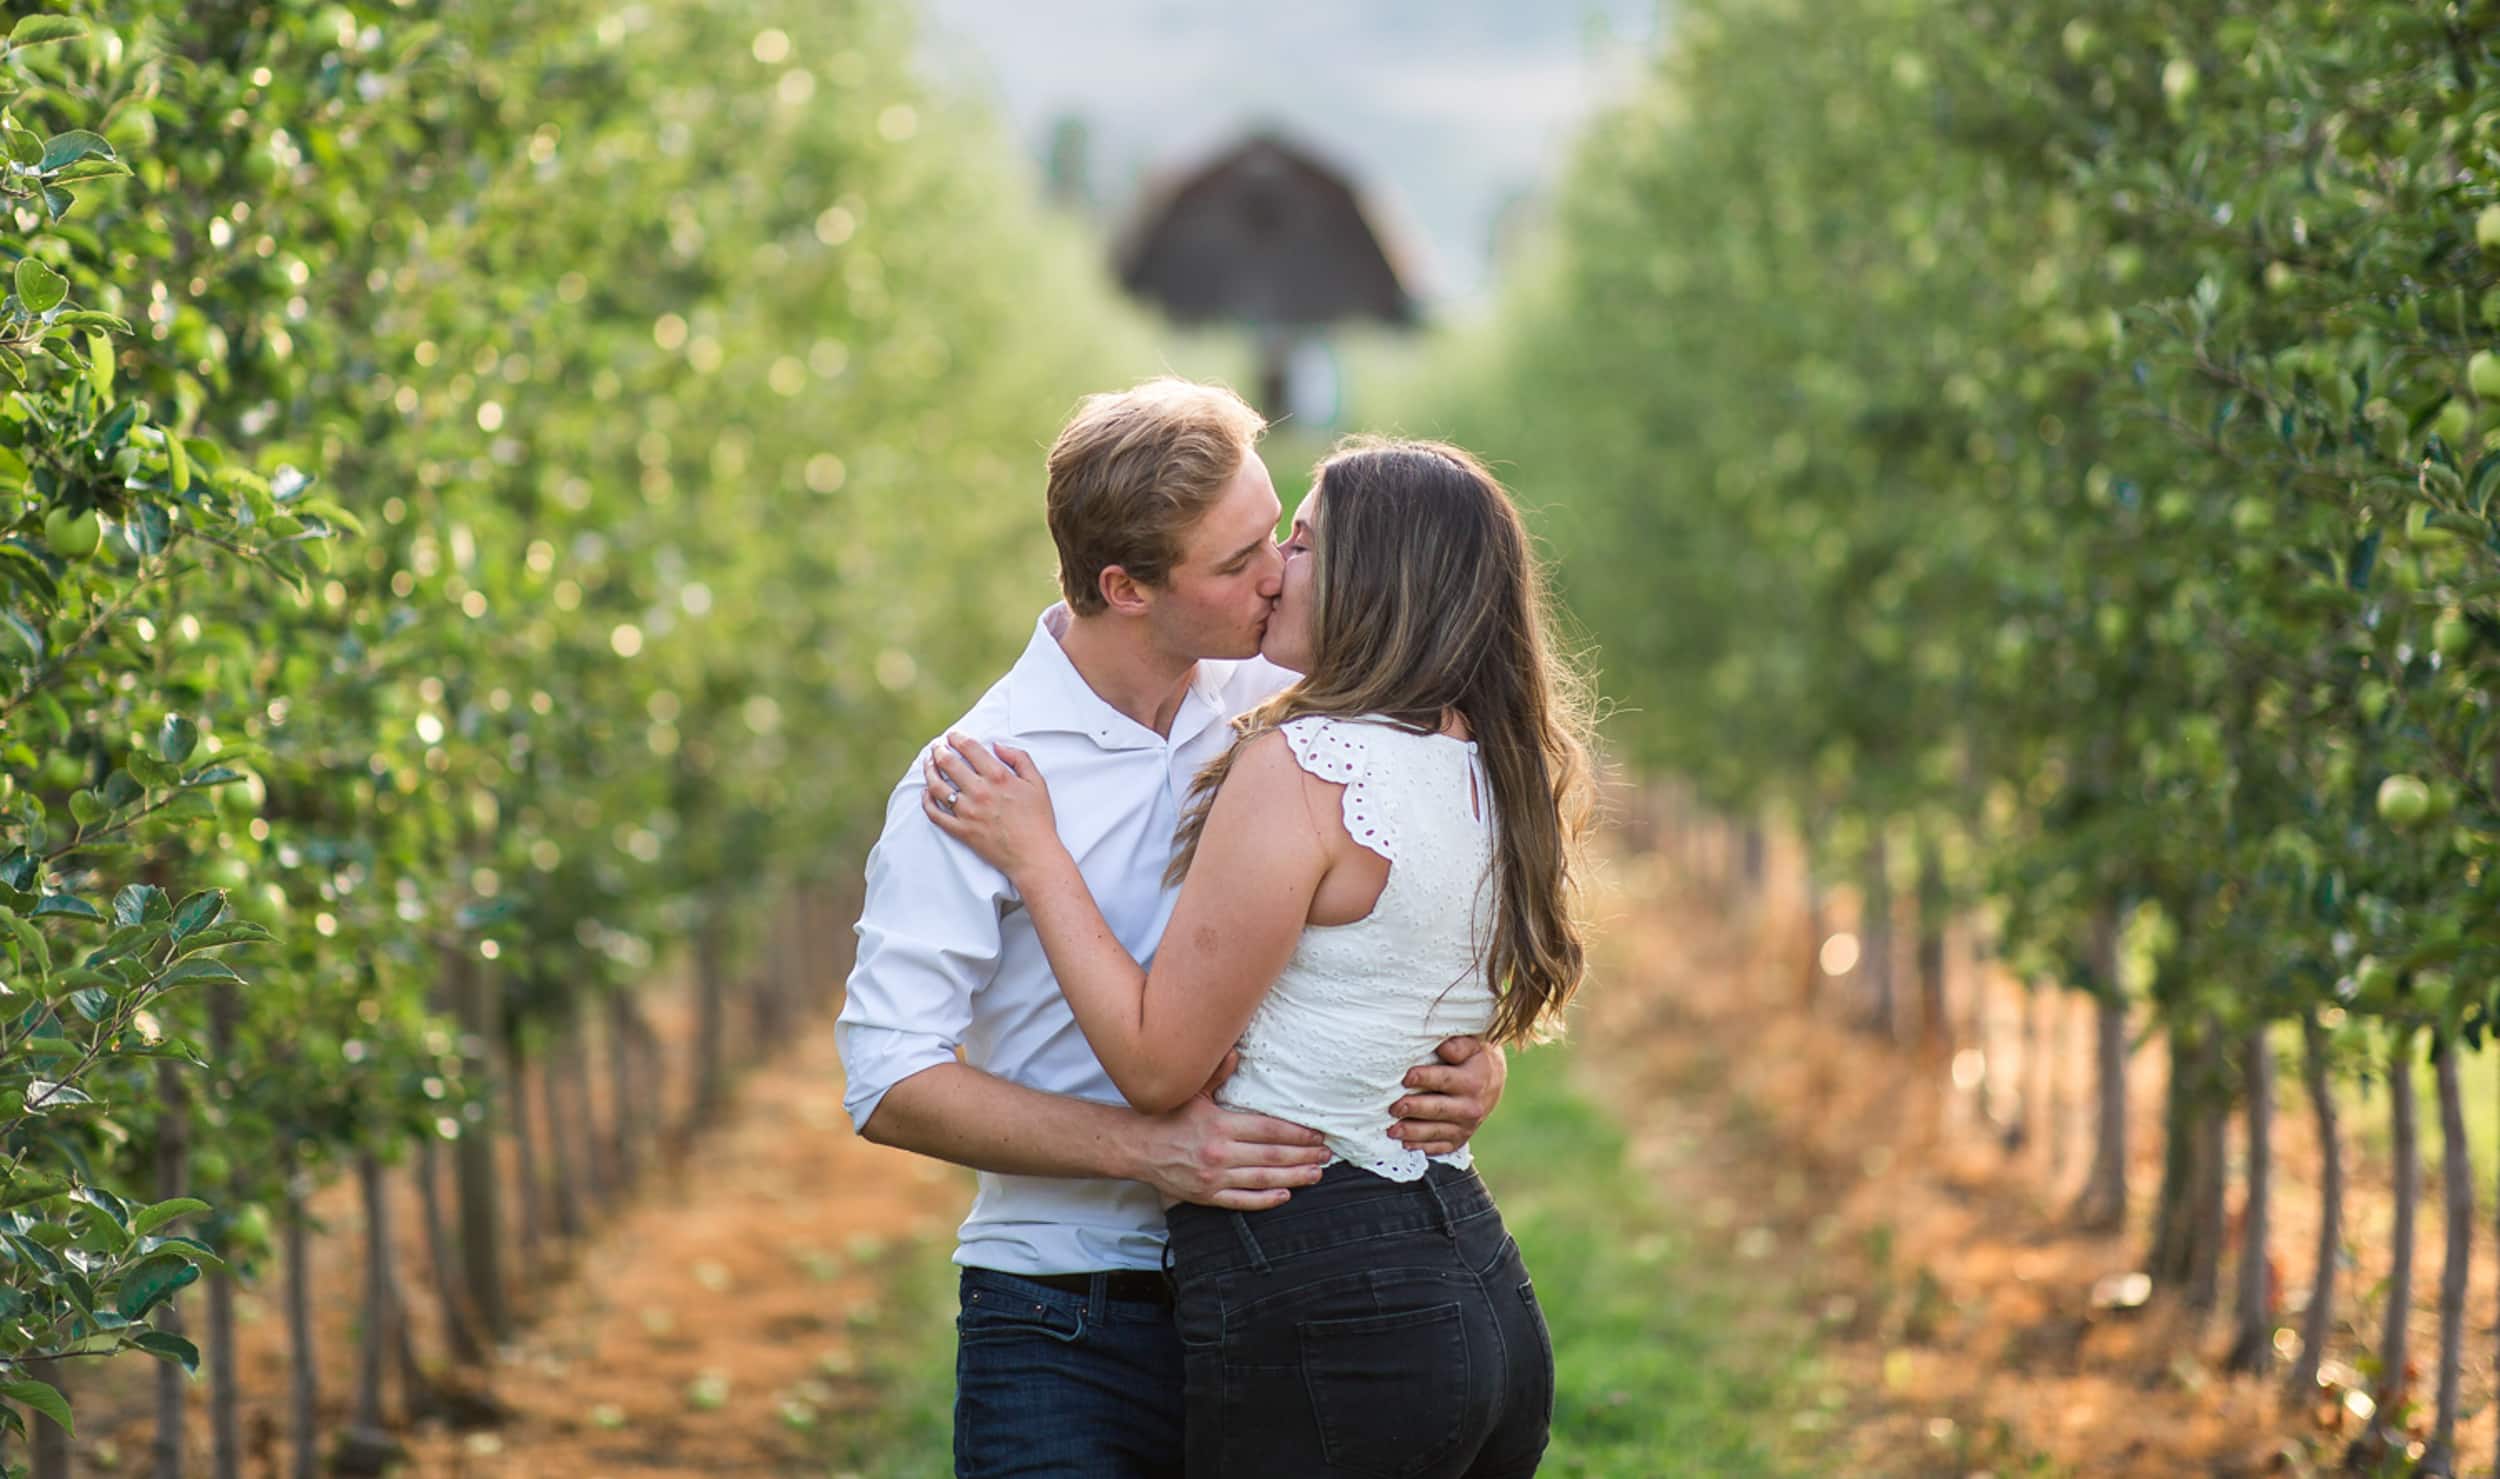 Couple Portraits in Vineyard - Vancouver BC Engagement Photography